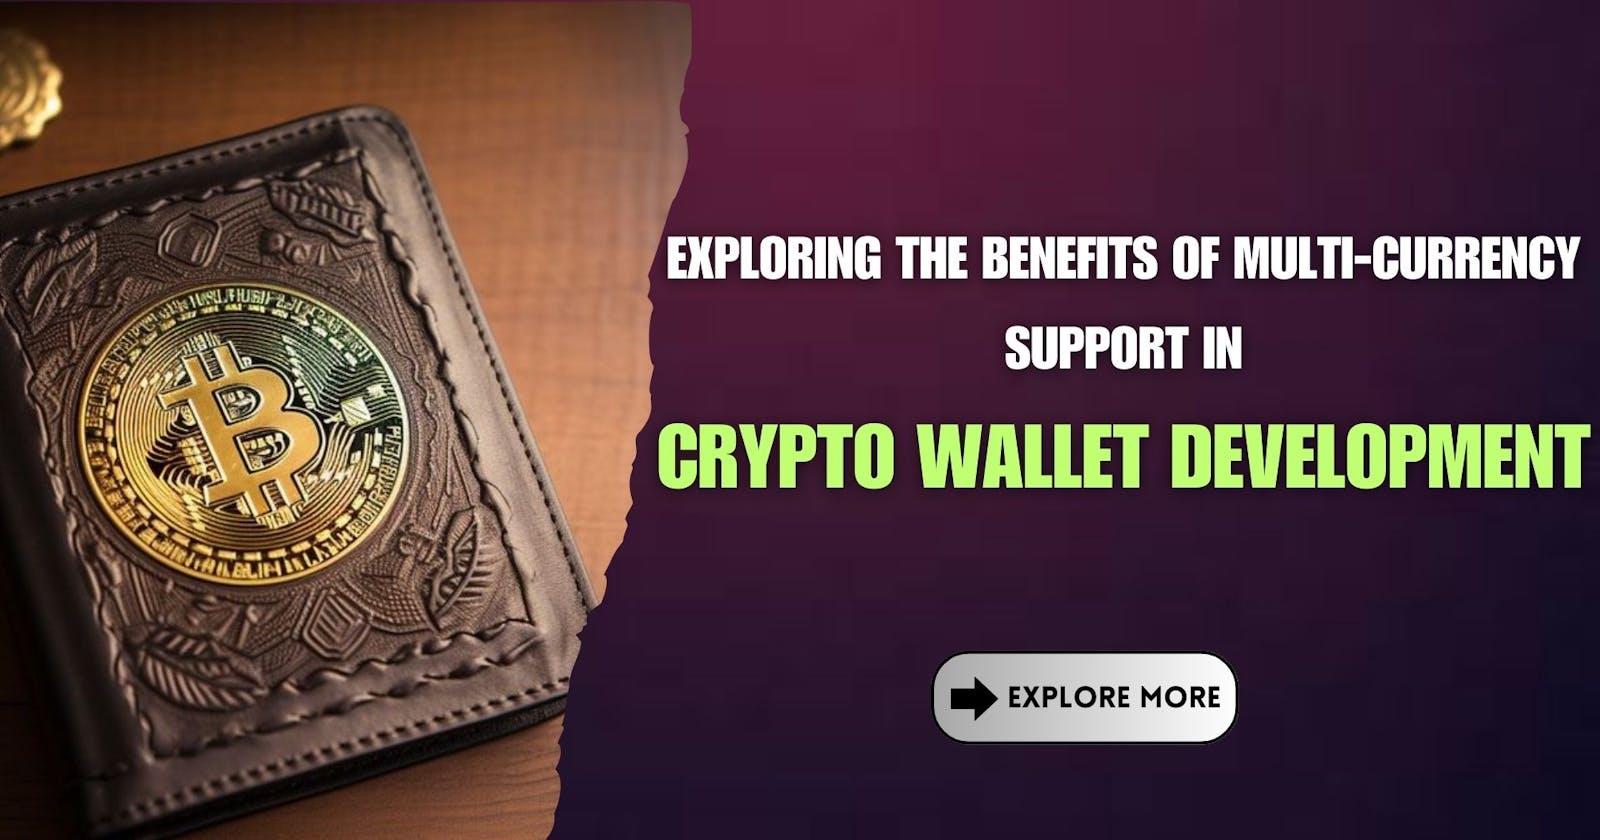 Exploring the Benefits of Multi-Currency Support in Crypto Wallet Development